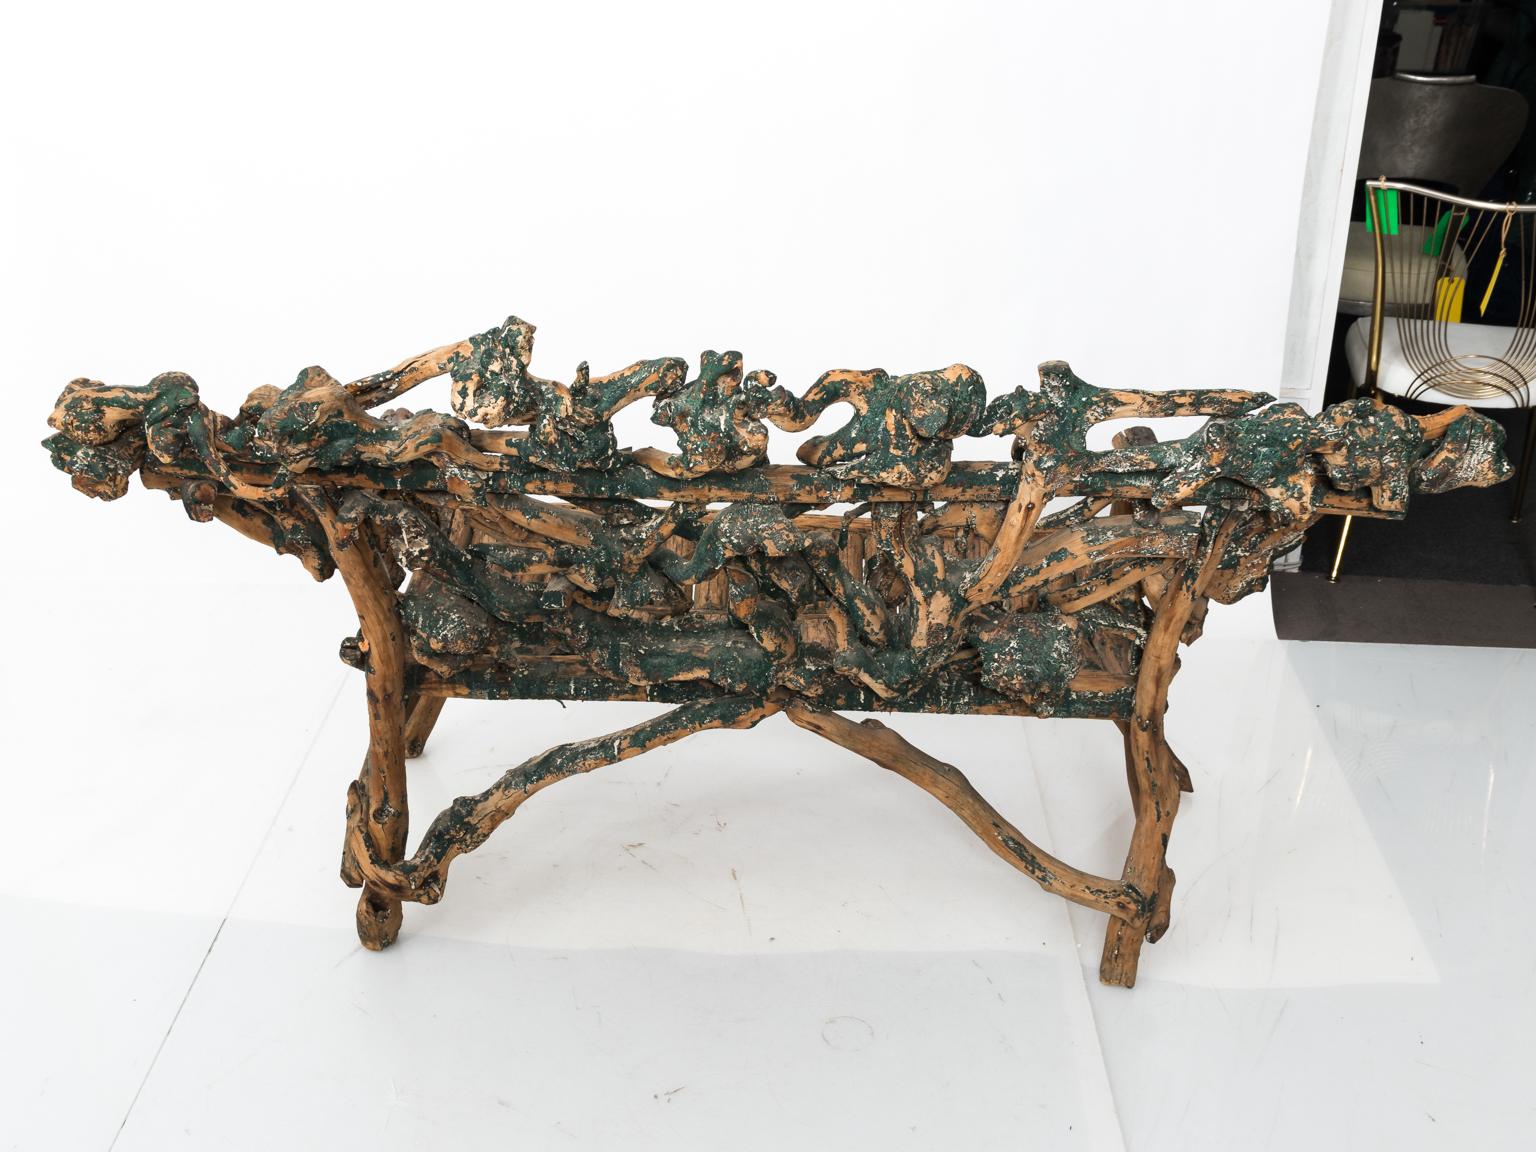 Twig driftwood bench in a carved, rough-hewn finish.